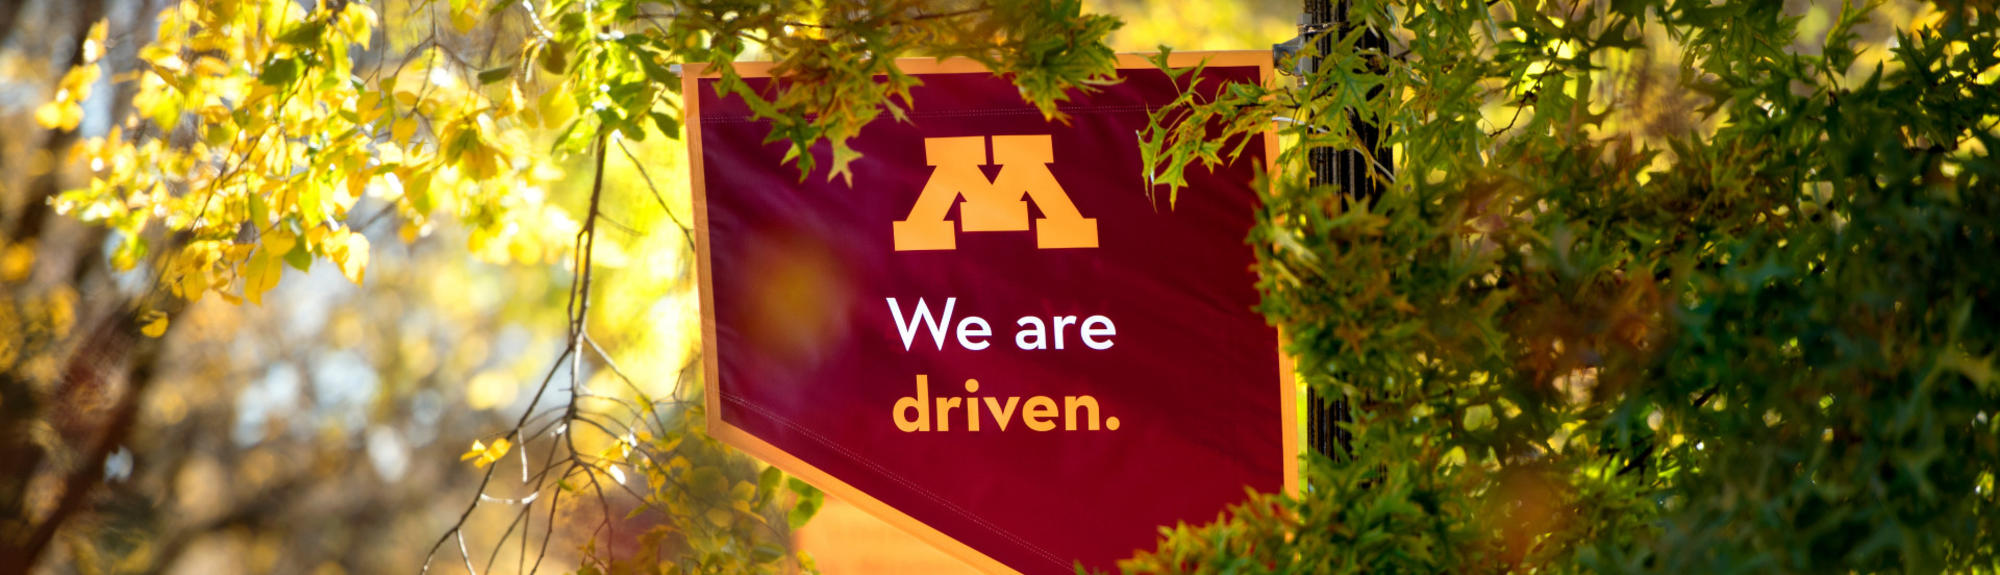 "We are driven" banner against leaves